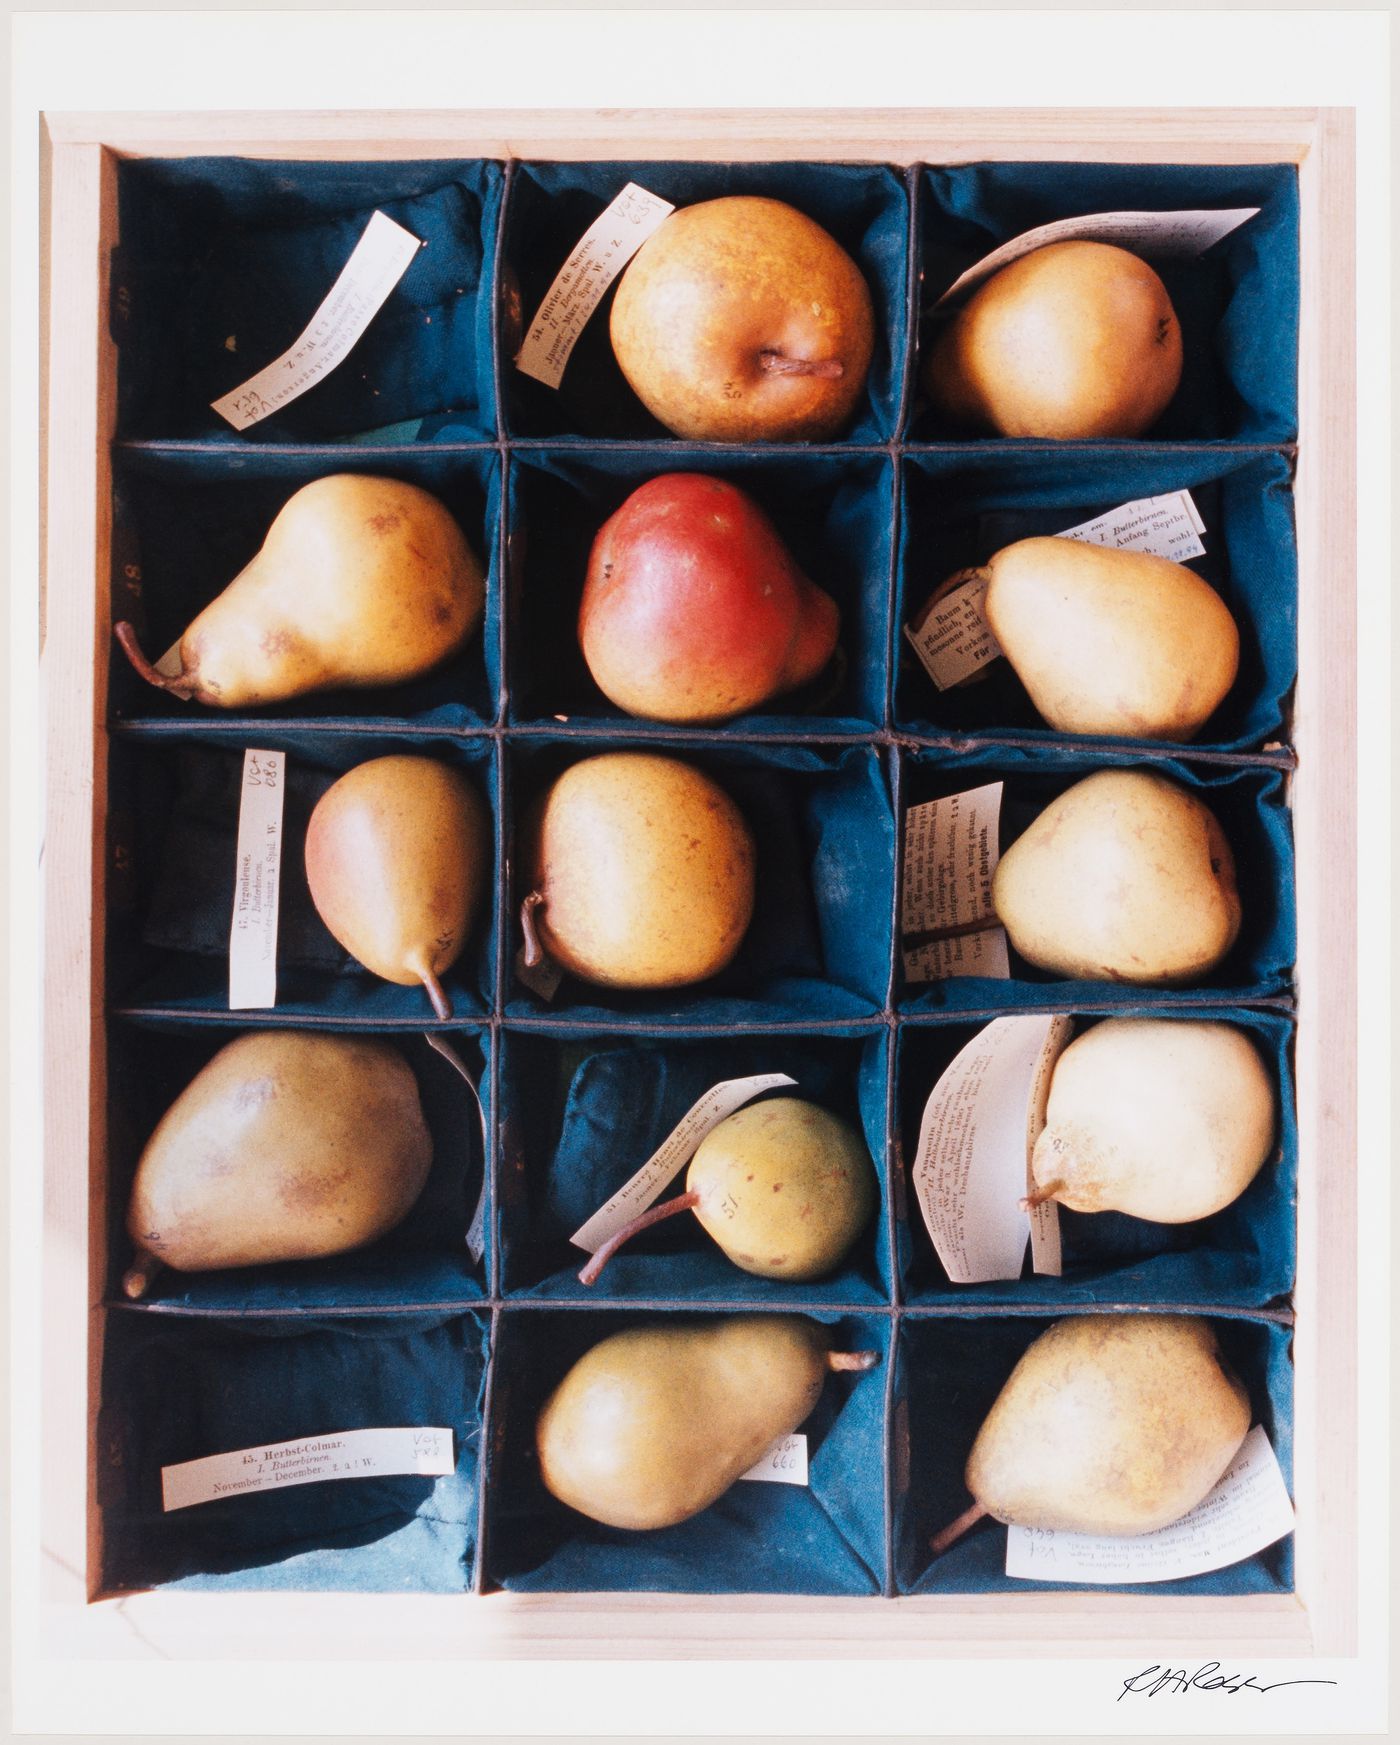 Close-up view of a box with compartments containing plaster pears and identifying labels, Joanneum Museum, Graz, Austria